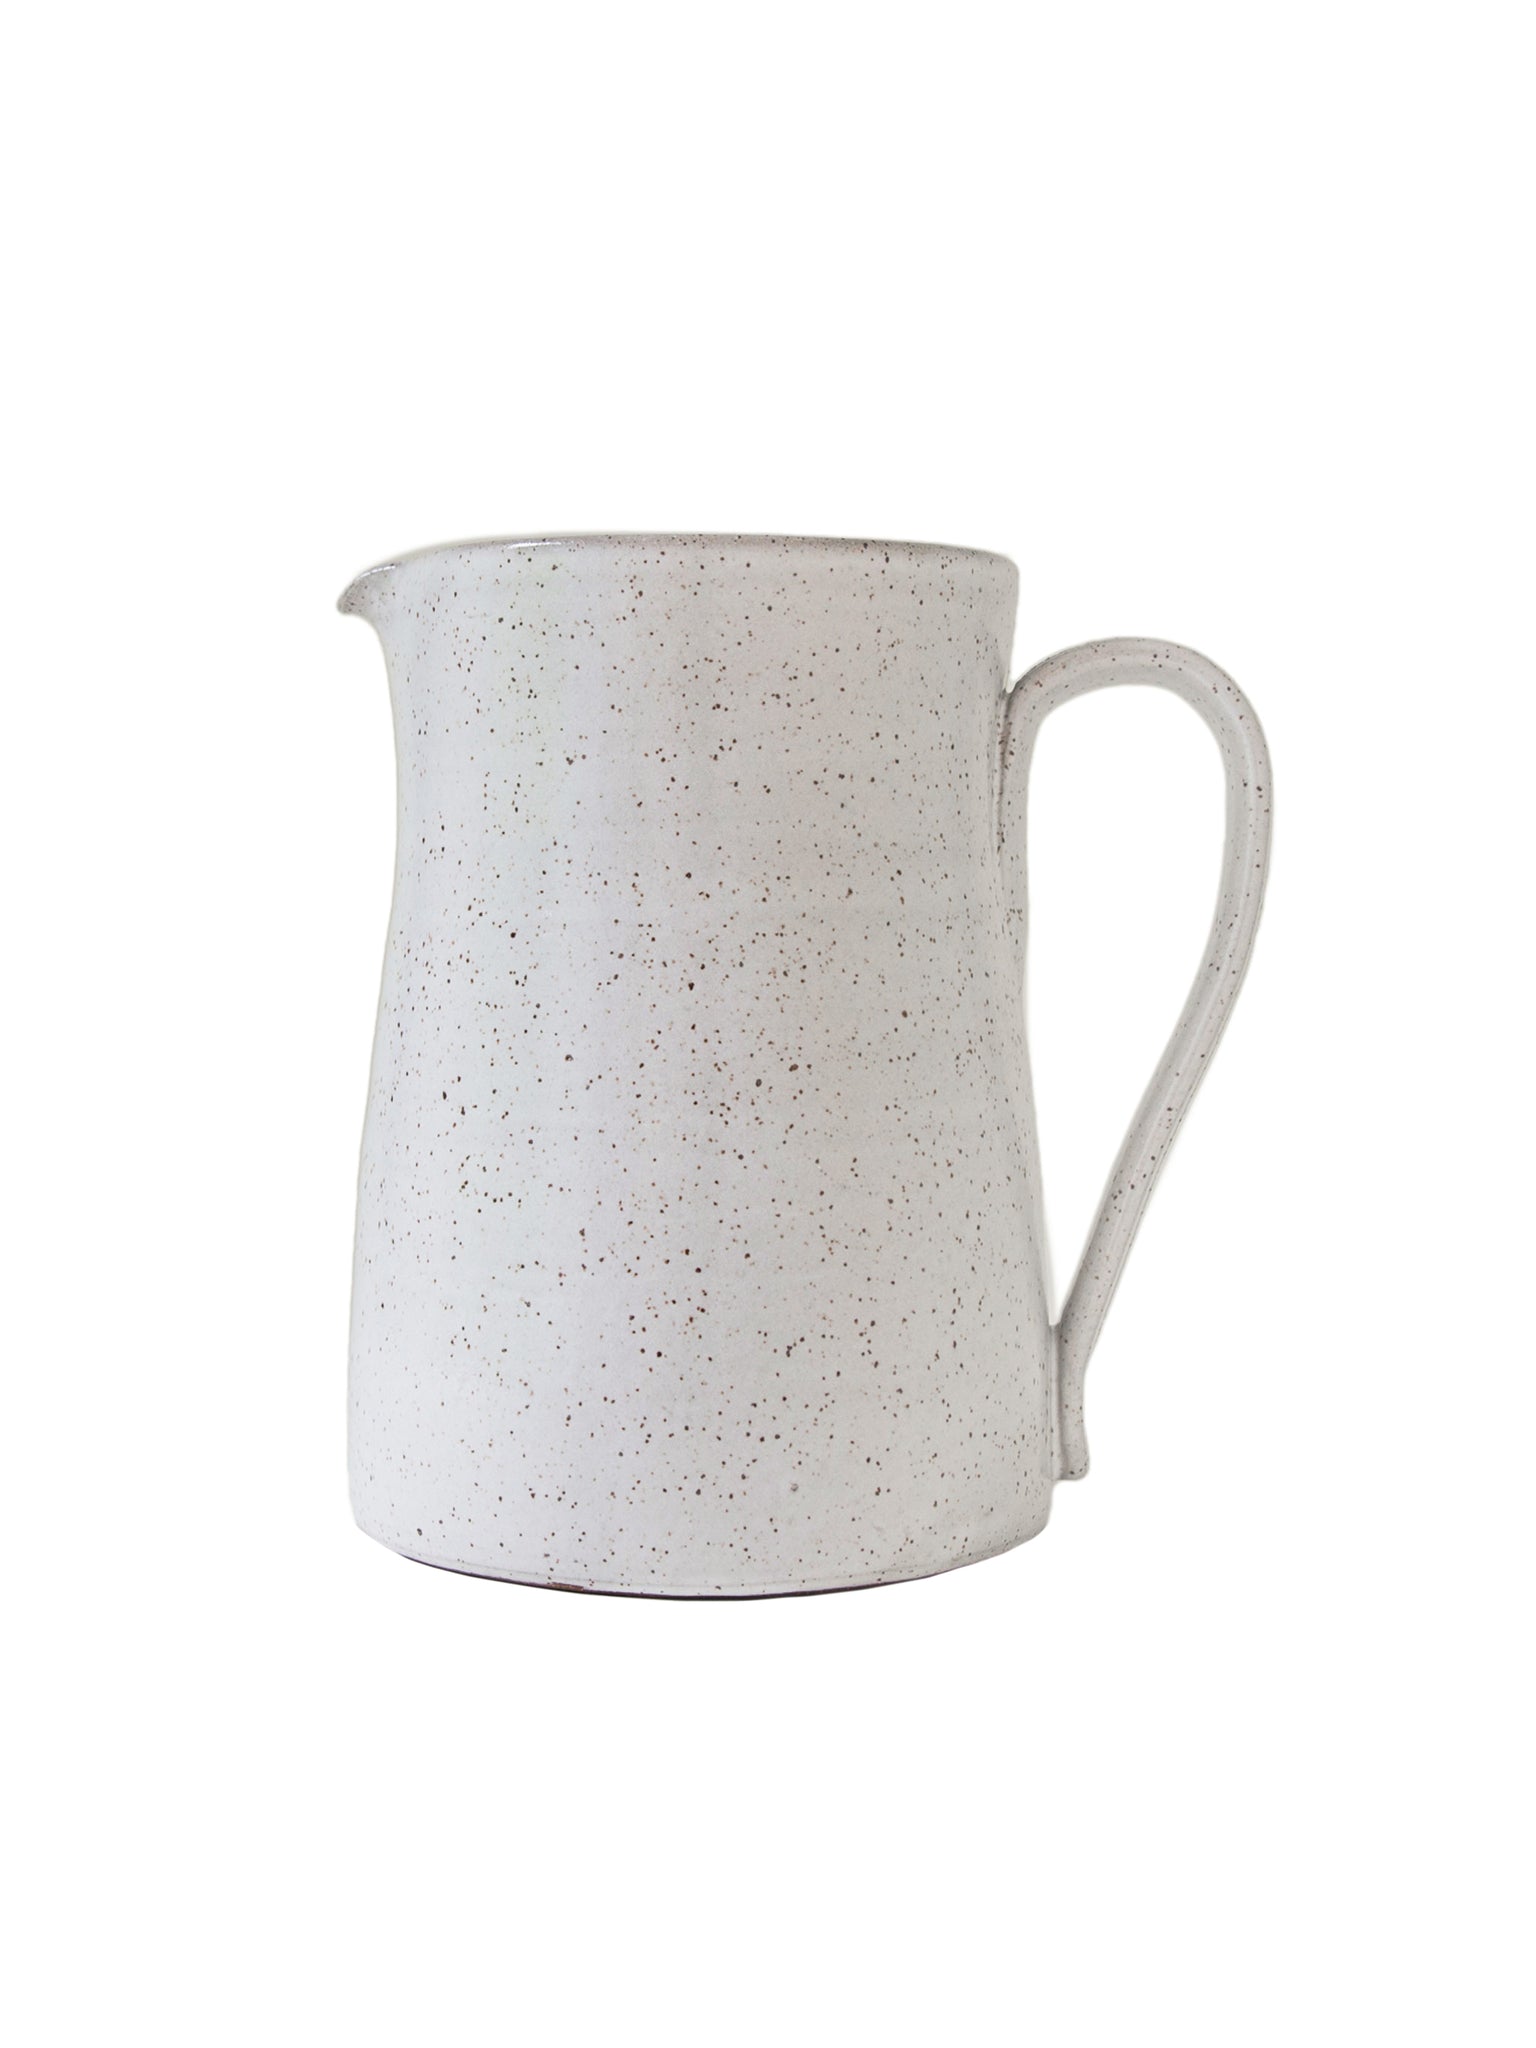 McQueen Pottery Speckled Pitcher Large Weston Table